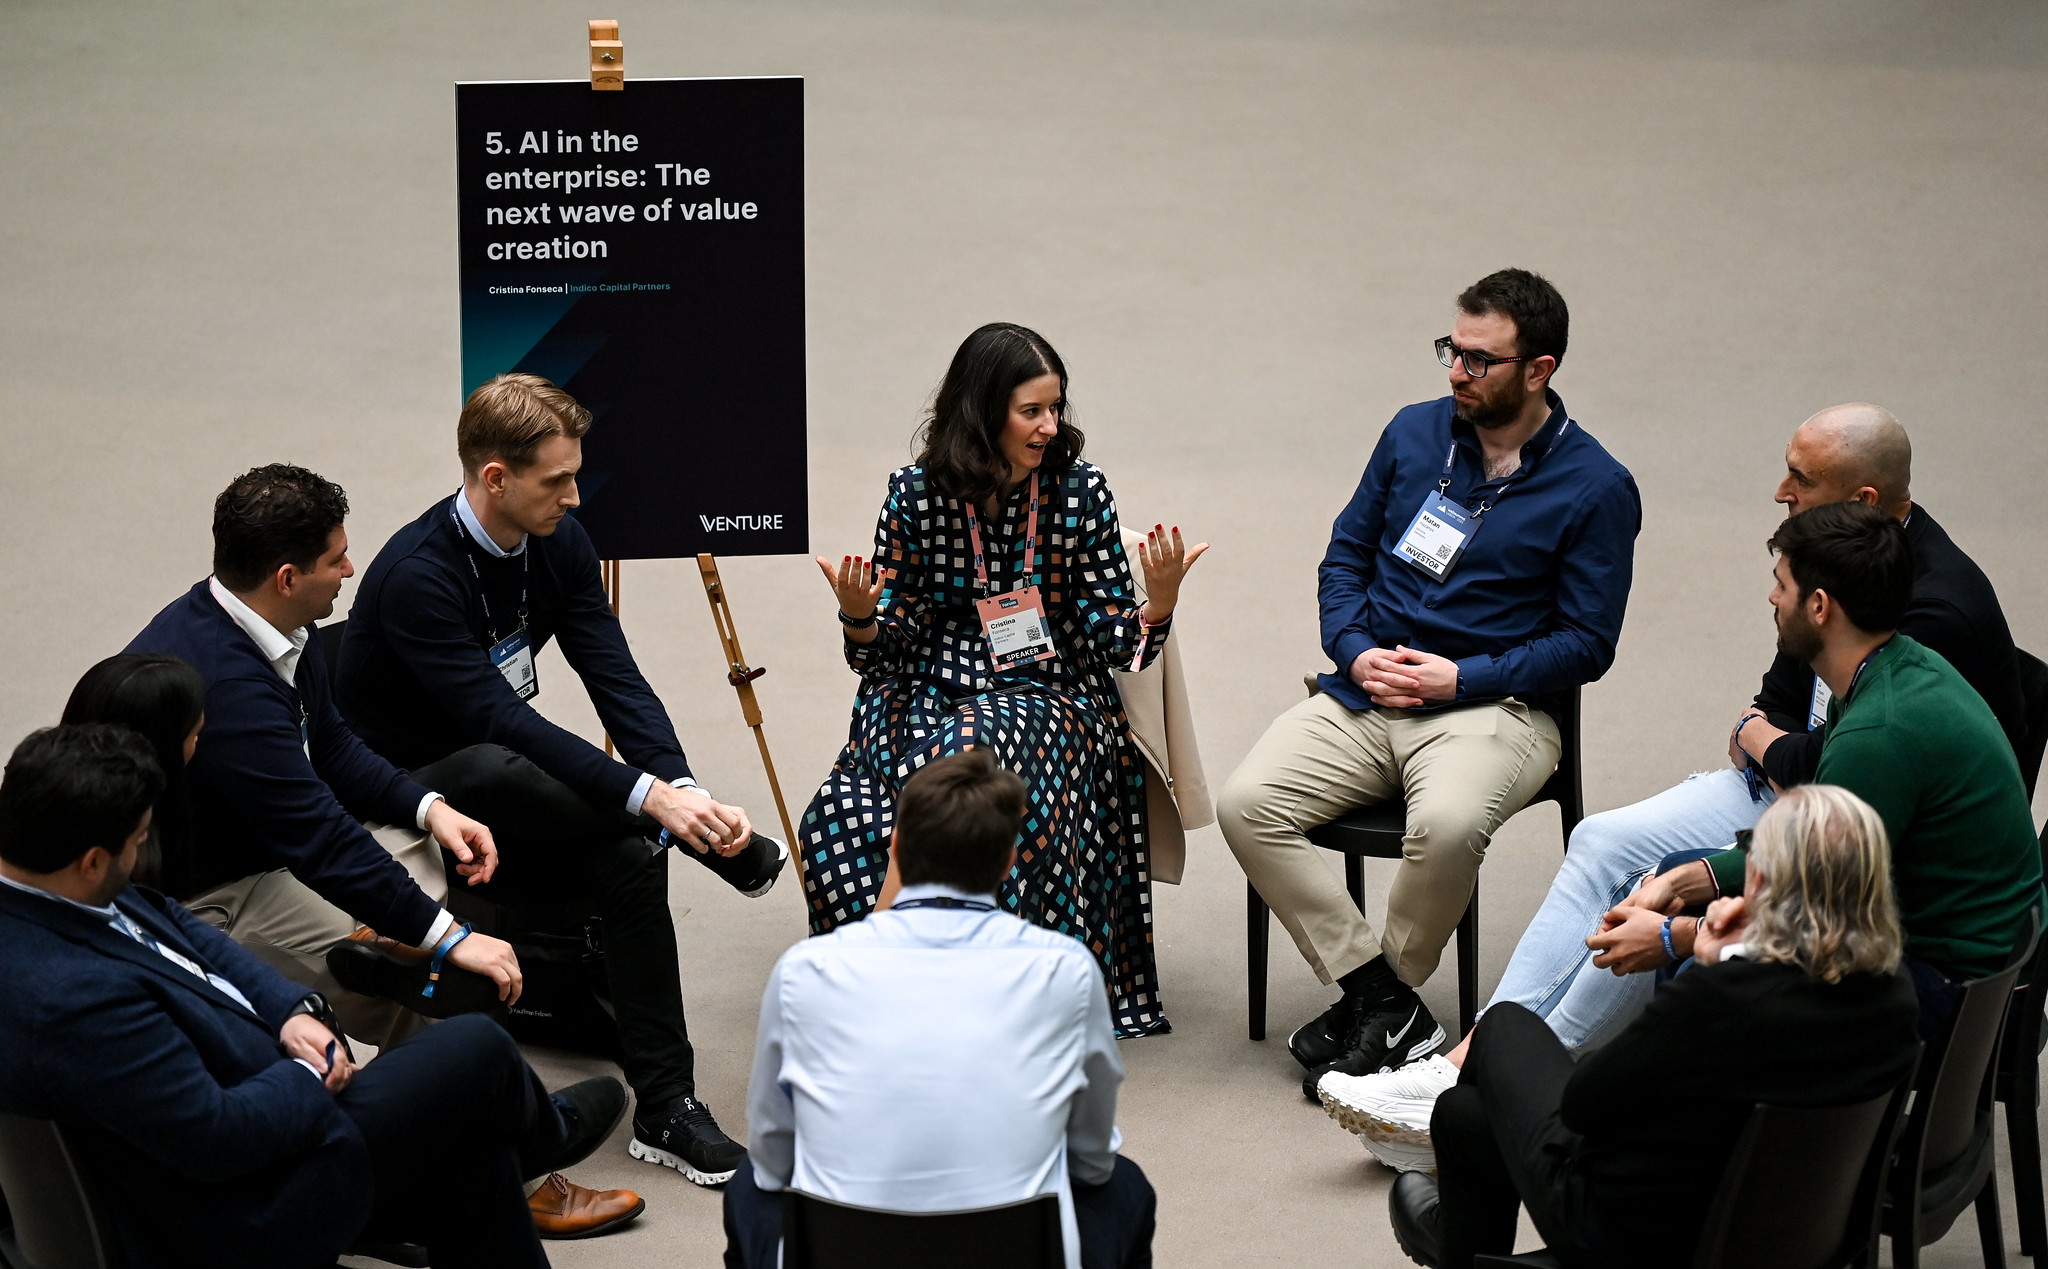 AI in the enterprise: The next wave of value creation speaker Cristina Fonseca, Indico Capital Partners at Roundtables during Venture at the Convento do Beato in Lisbon, Portugal.